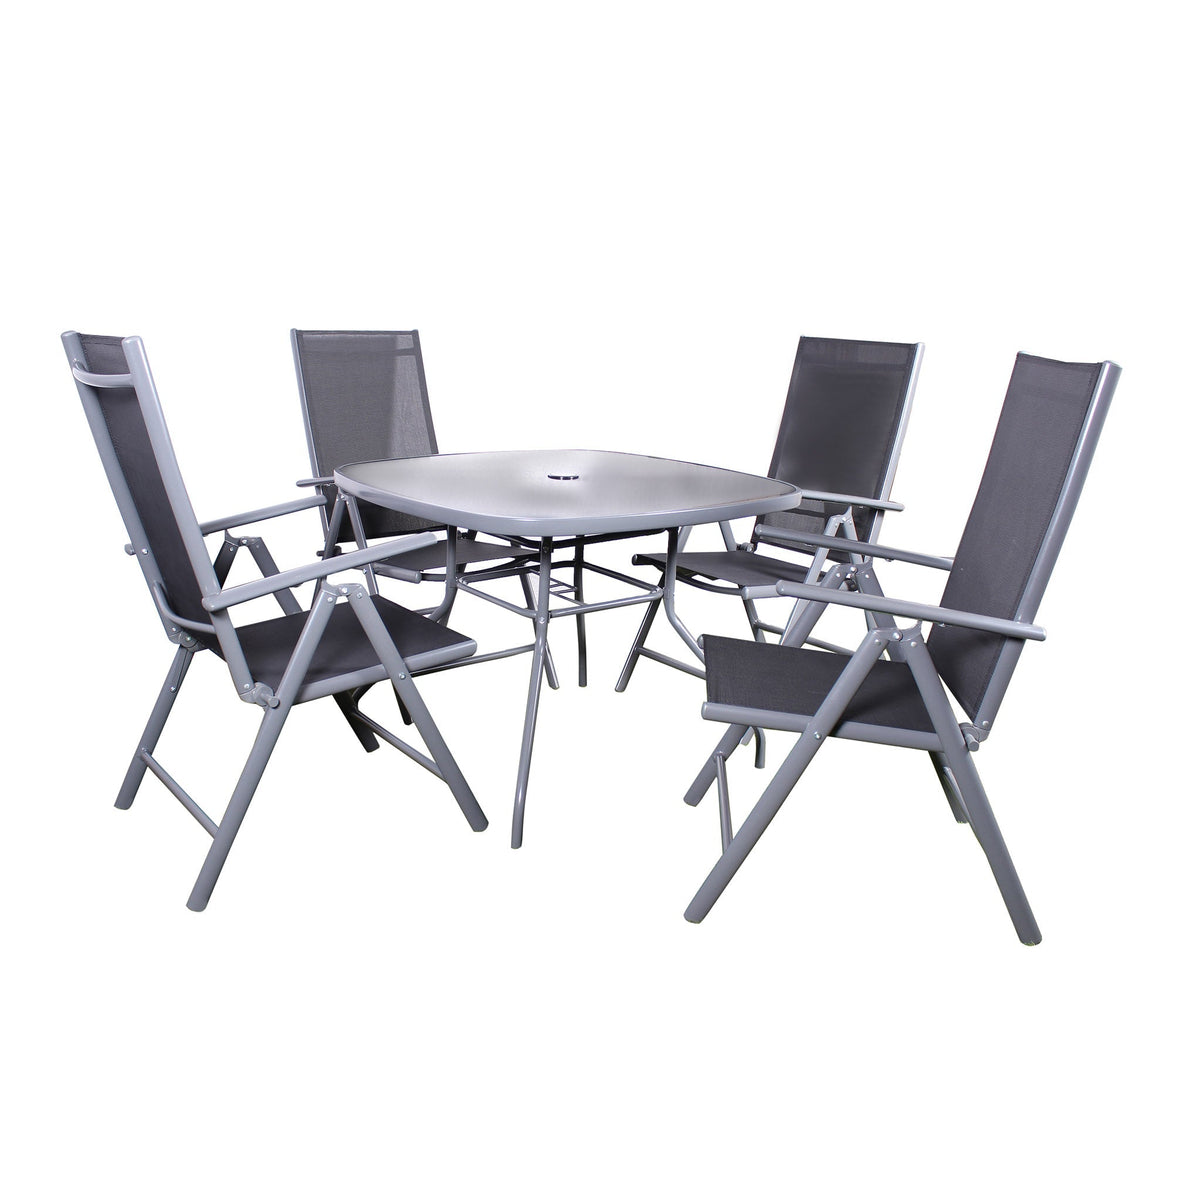 Rio Reclining 4 Seat Outdoor Dining Set with Parasol